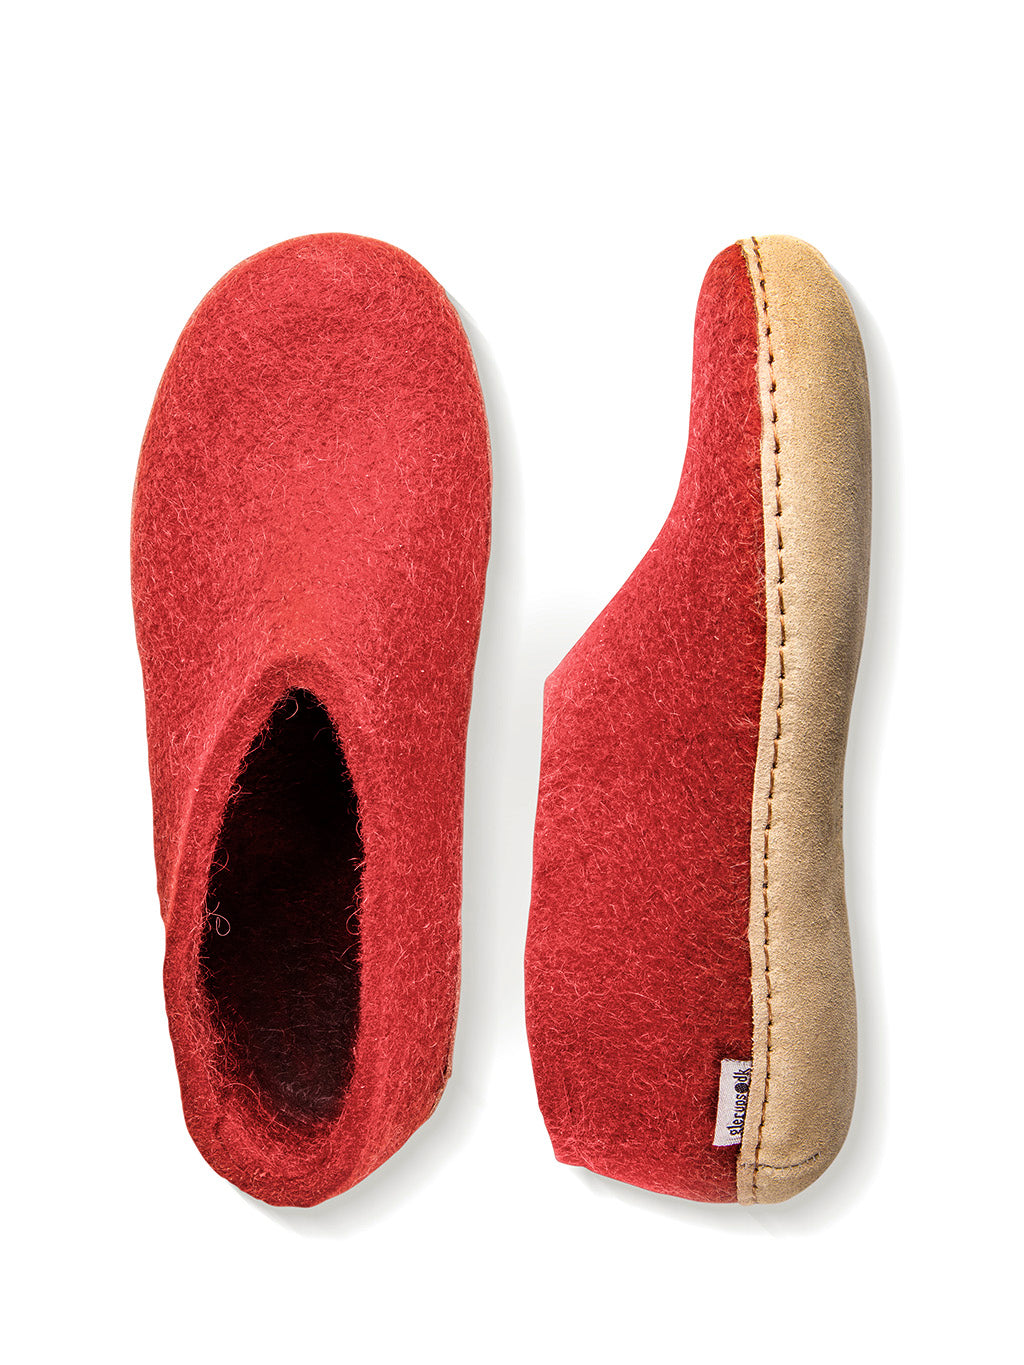 Red wool shoe with leather sole *size 41*